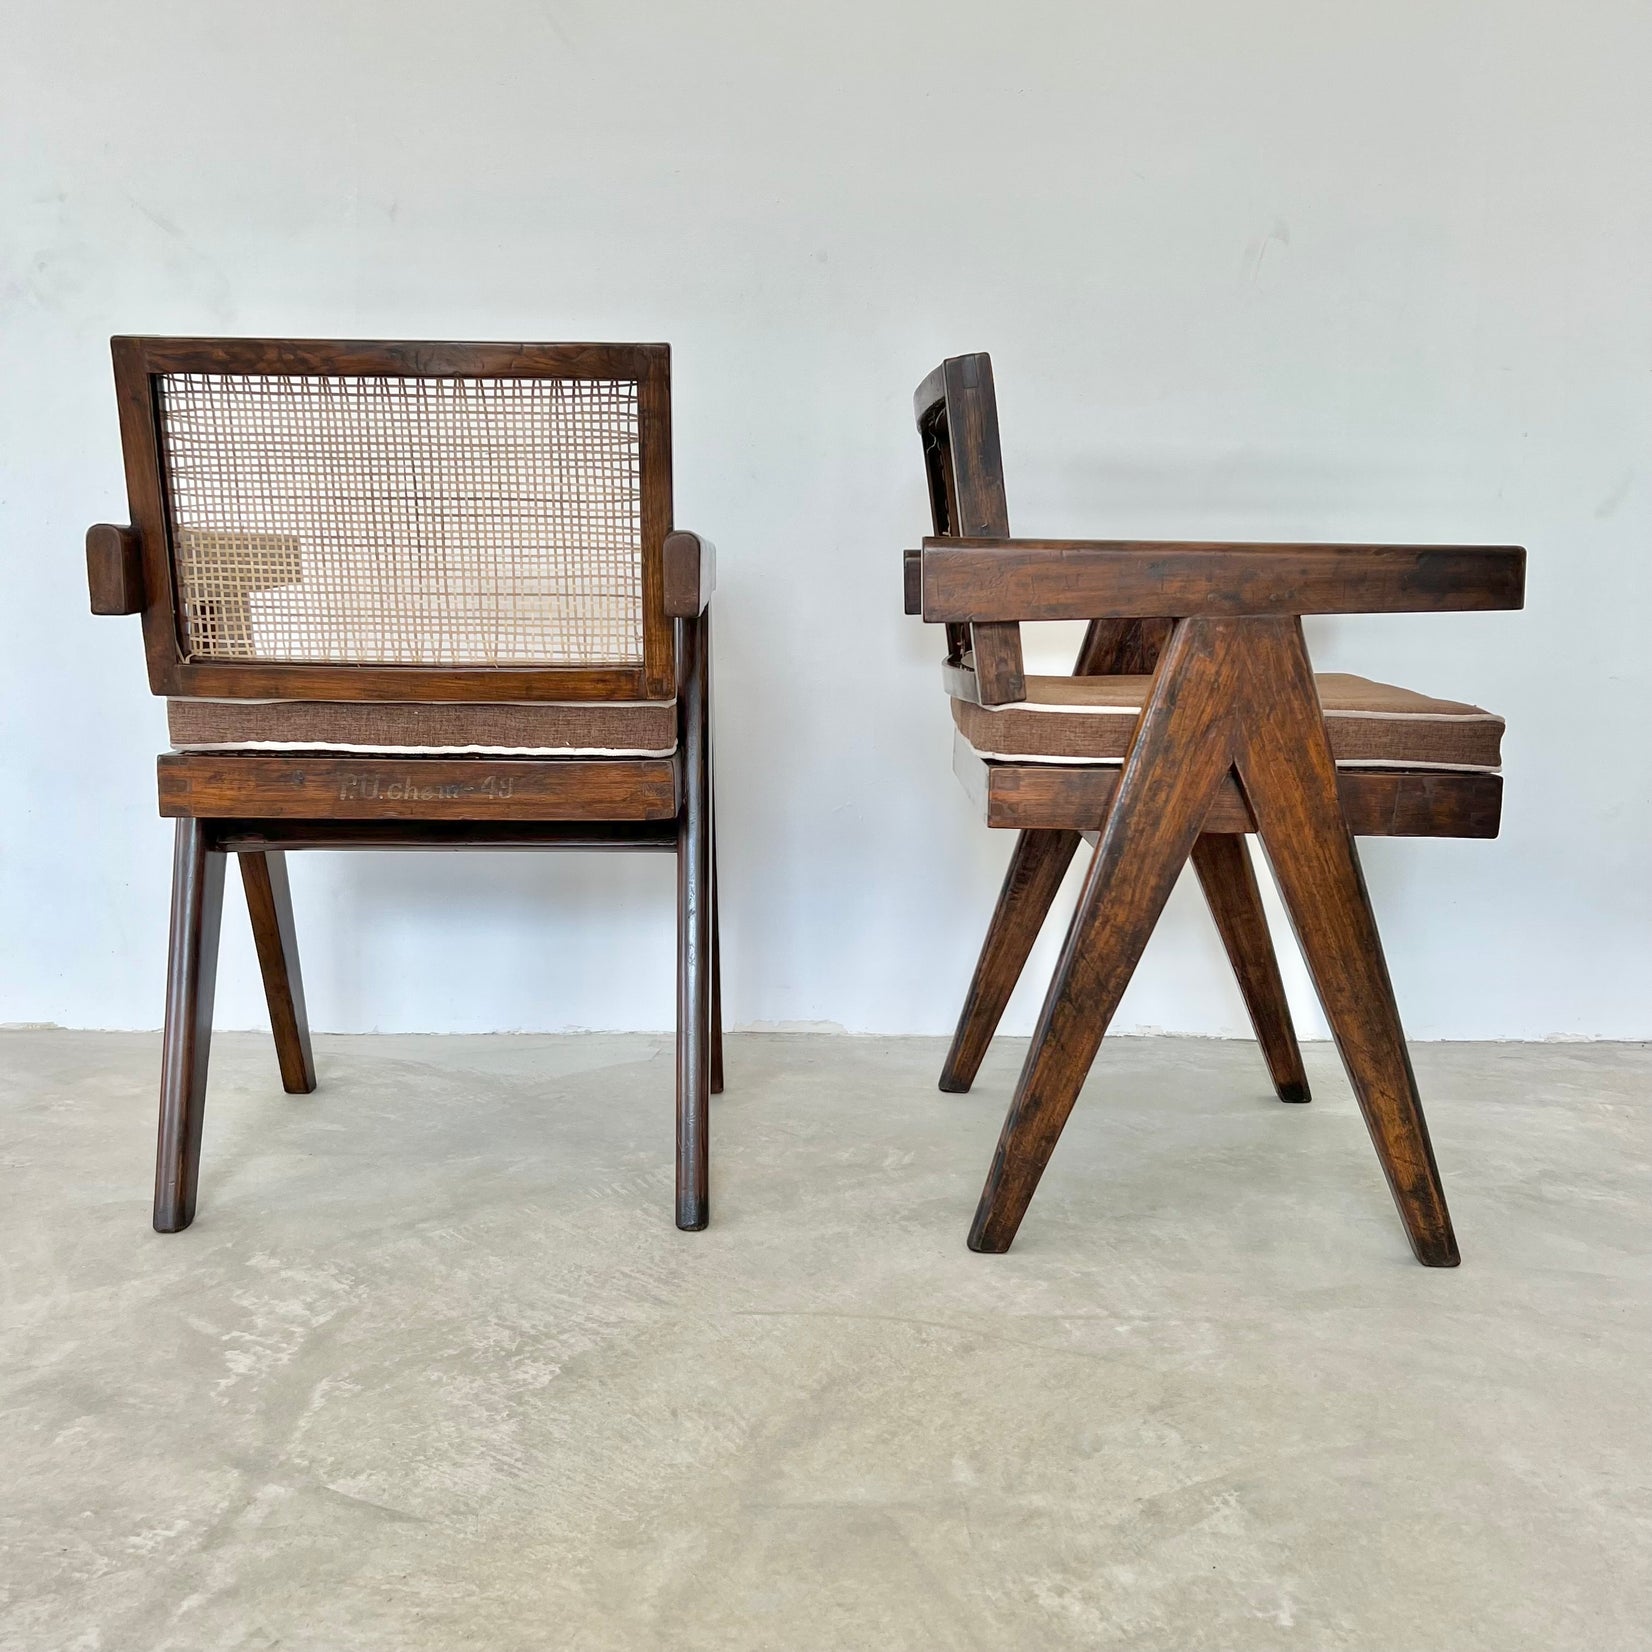 Pierre Jeanneret Office Chairs, 1950s Chandigargh